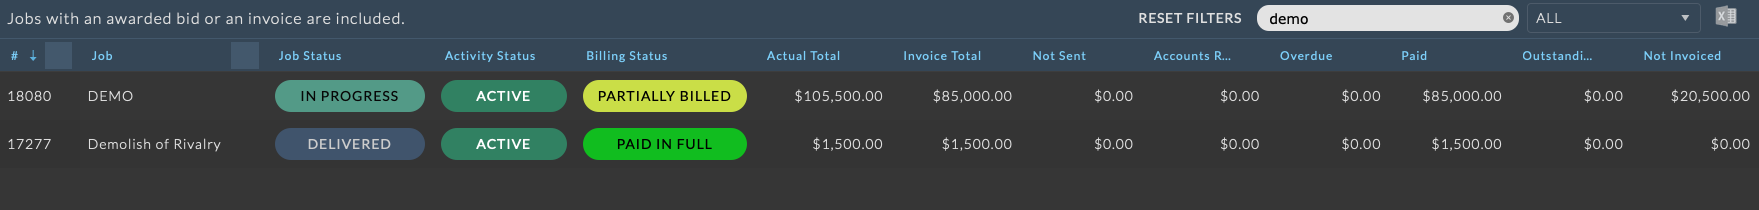 _images/nim5_invoices_studio_billing_search_filter.png